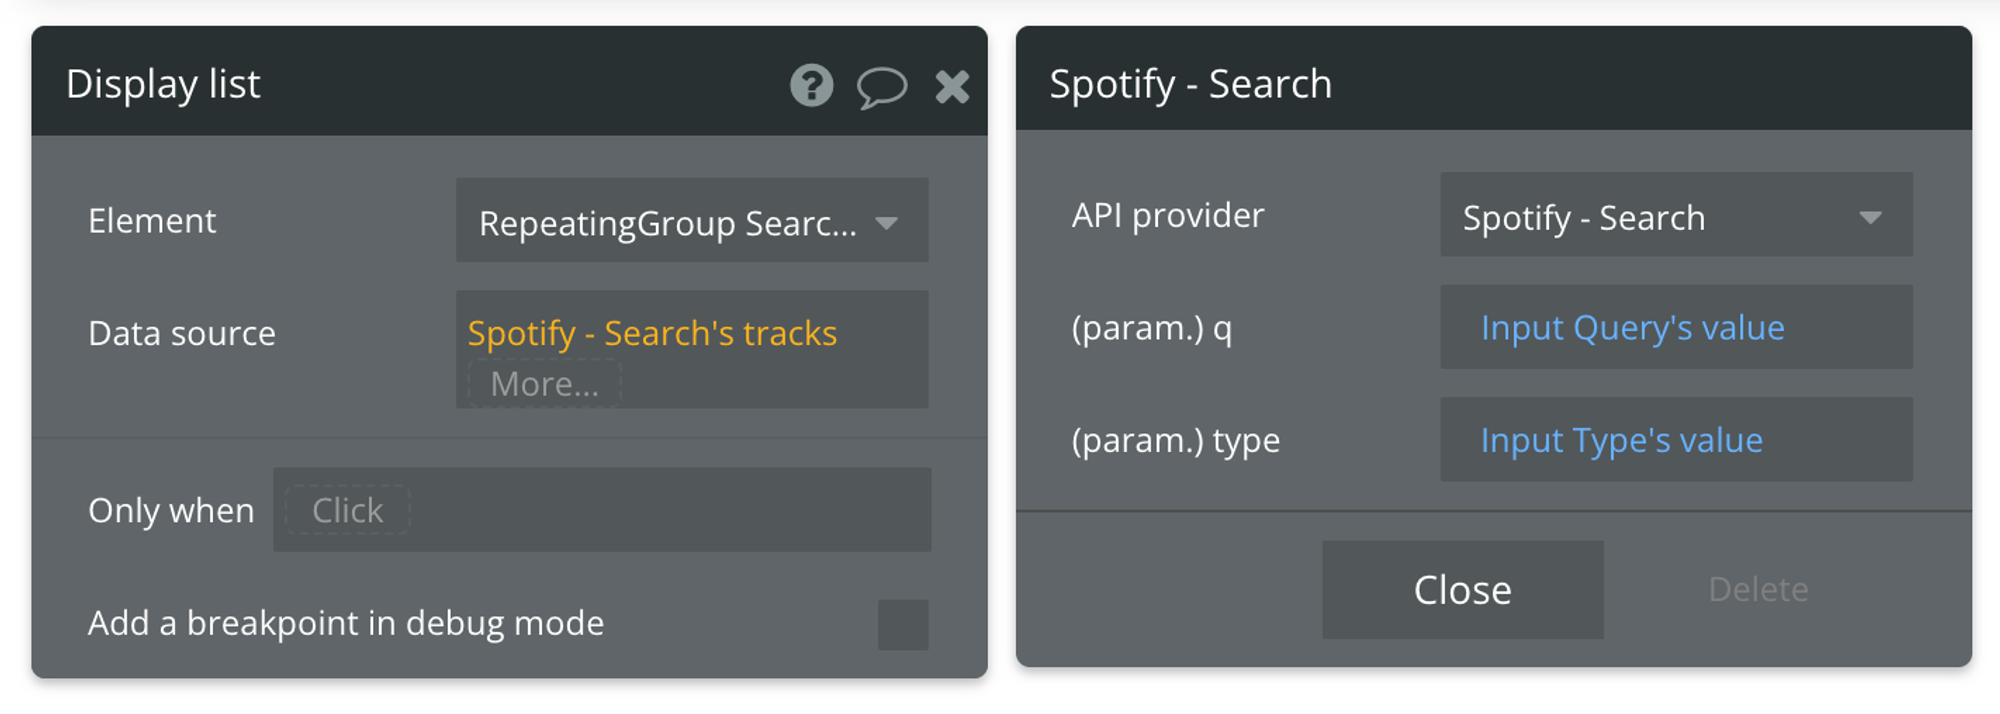 Select "Get data from external API" from the list of data sources, then find Spotify - Search's tracks from the list of API providers